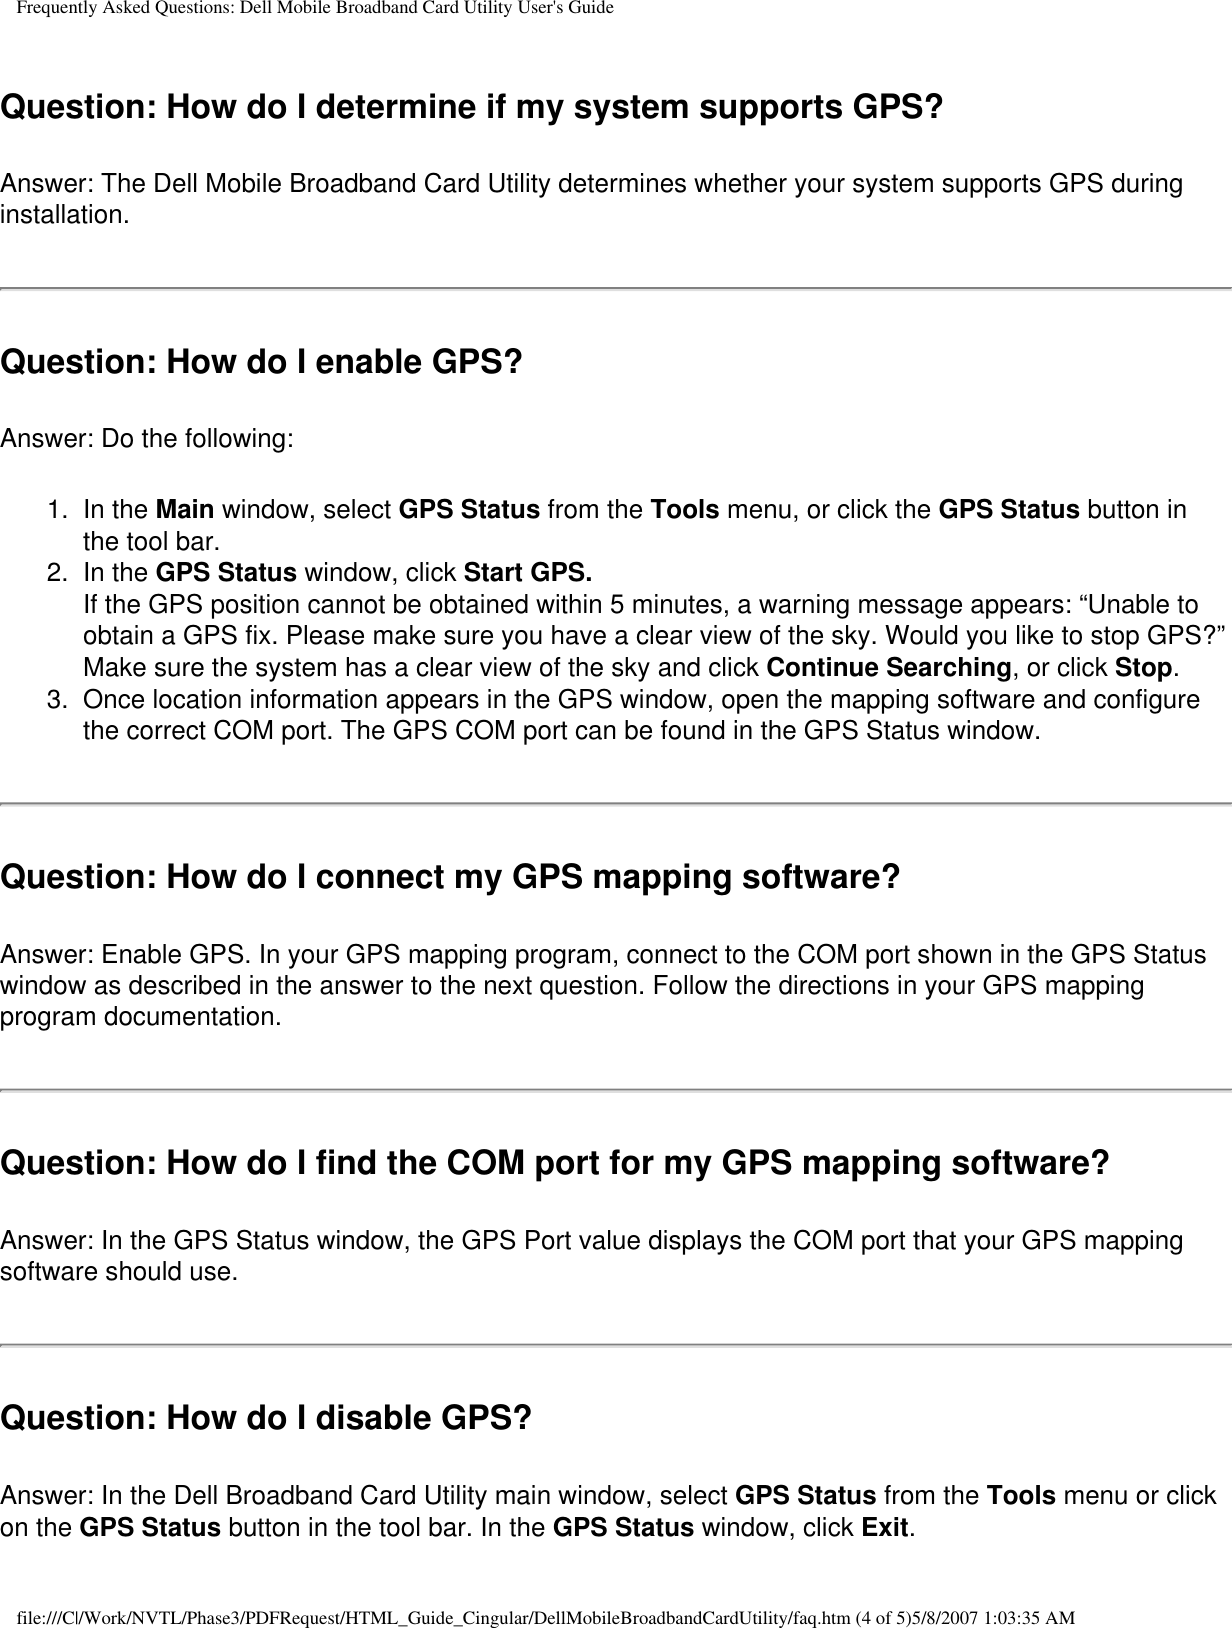 Frequently Asked Questions: Dell Mobile Broadband Card Utility User&apos;s GuideQuestion: How do I determine if my system supports GPS? Answer: The Dell Mobile Broadband Card Utility determines whether your system supports GPS during installation.Question: How do I enable GPS? Answer: Do the following:1.  In the Main window, select GPS Status from the Tools menu, or click the GPS Status button in the tool bar.2.  In the GPS Status window, click Start GPS.If the GPS position cannot be obtained within 5 minutes, a warning message appears: “Unable to obtain a GPS fix. Please make sure you have a clear view of the sky. Would you like to stop GPS?” Make sure the system has a clear view of the sky and click Continue Searching, or click Stop. 3.  Once location information appears in the GPS window, open the mapping software and configure the correct COM port. The GPS COM port can be found in the GPS Status window.Question: How do I connect my GPS mapping software? Answer: Enable GPS. In your GPS mapping program, connect to the COM port shown in the GPS Status window as described in the answer to the next question. Follow the directions in your GPS mapping program documentation.Question: How do I find the COM port for my GPS mapping software? Answer: In the GPS Status window, the GPS Port value displays the COM port that your GPS mapping software should use.Question: How do I disable GPS? Answer: In the Dell Broadband Card Utility main window, select GPS Status from the Tools menu or click on the GPS Status button in the tool bar. In the GPS Status window, click Exit.file:///C|/Work/NVTL/Phase3/PDFRequest/HTML_Guide_Cingular/DellMobileBroadbandCardUtility/faq.htm (4 of 5)5/8/2007 1:03:35 AM